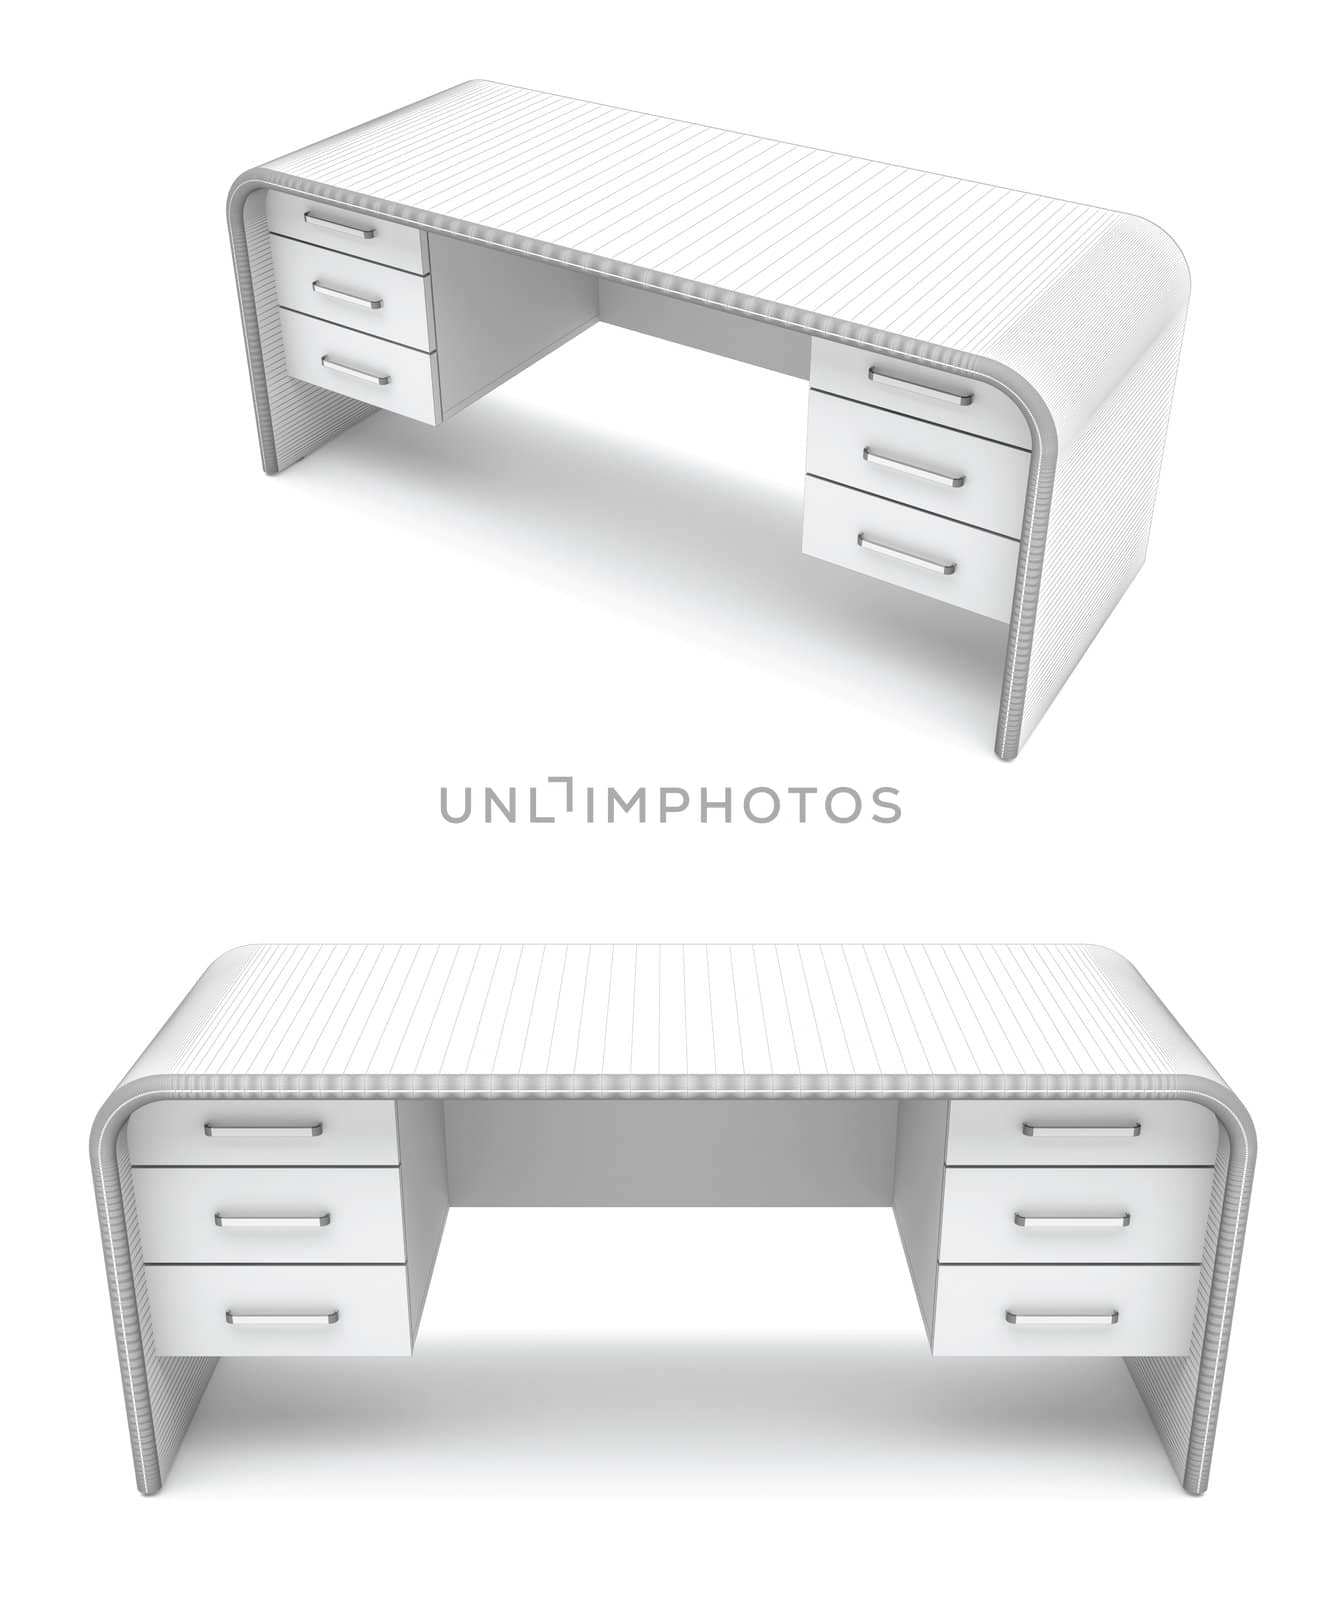 3d render of desk with wire-frame, two different views